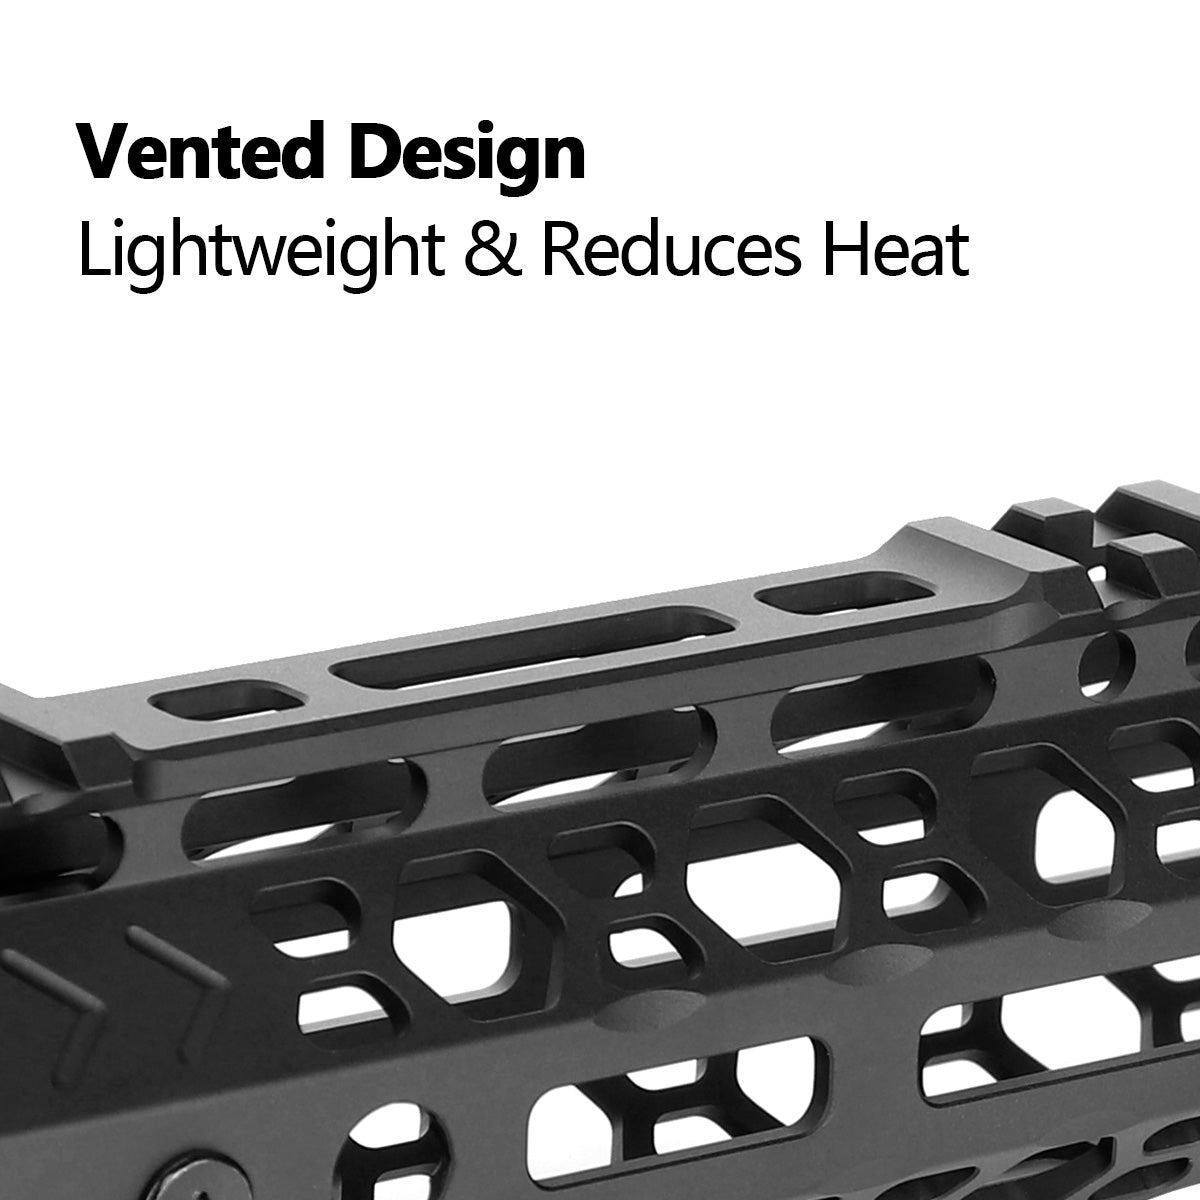 Ultra Slim and Enlarged Vented Design for Comfort and Weight Reduction, cool both your handguard and barrel.